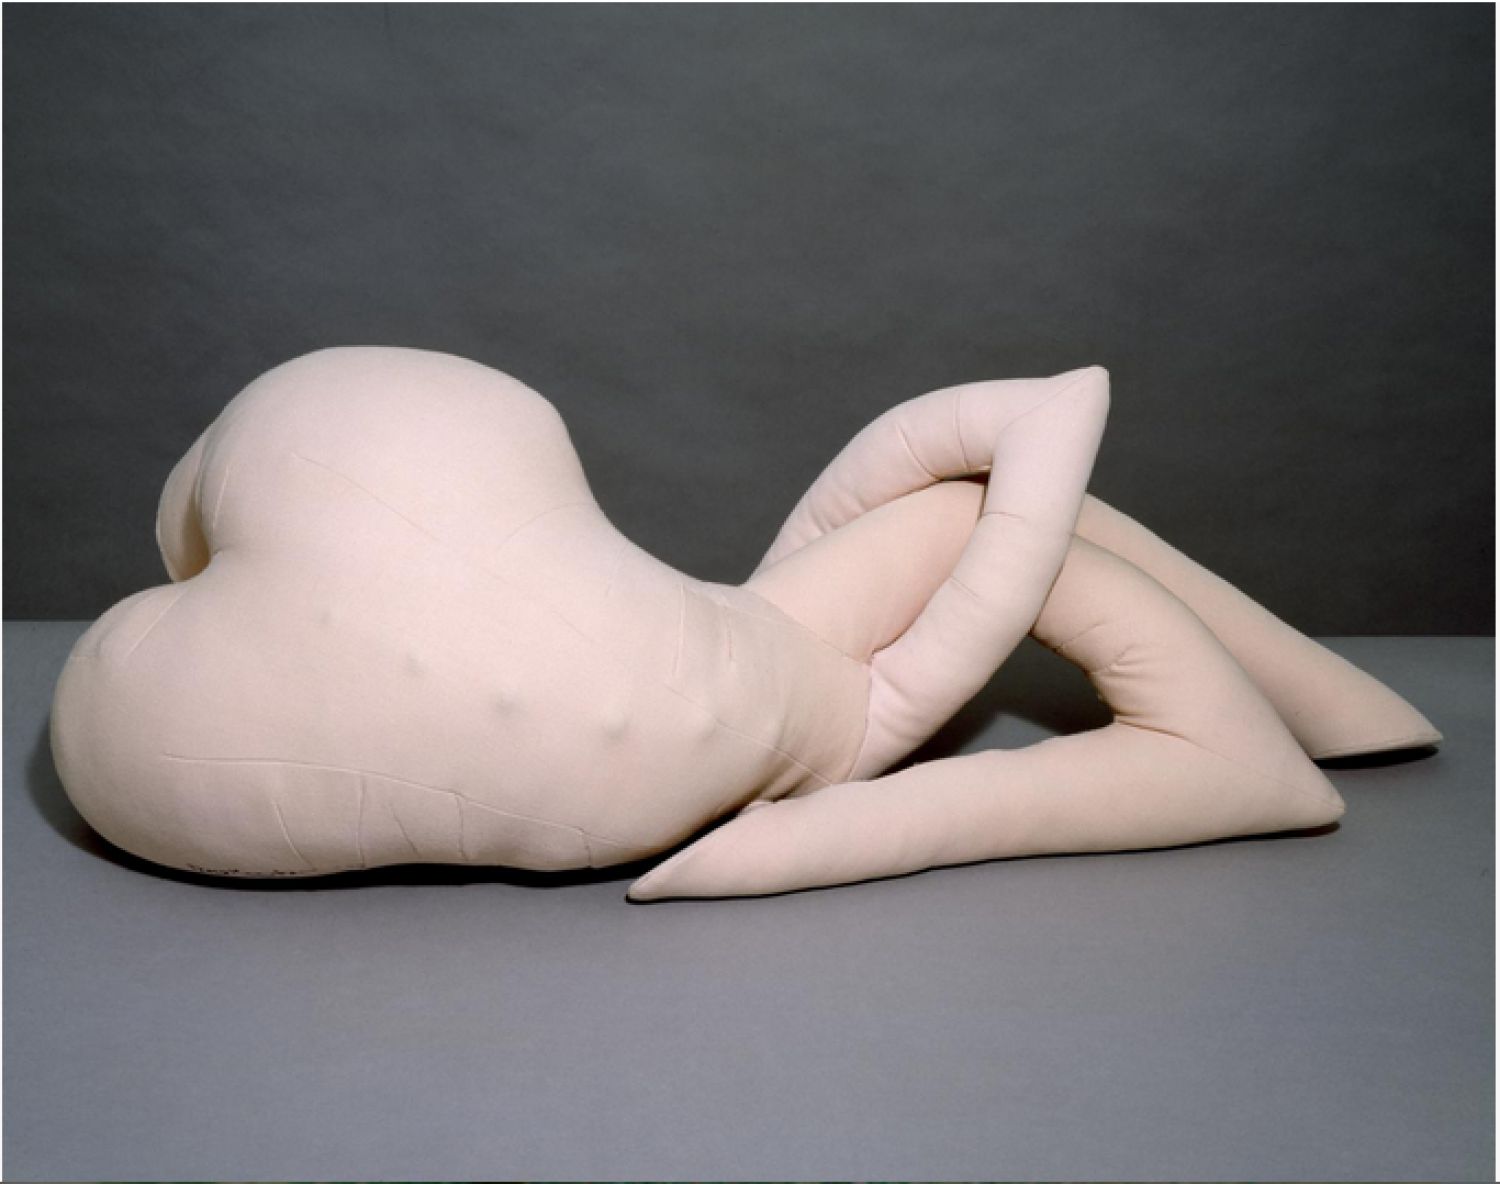 Dorothea Tanning, Nue couchée, 1969-70